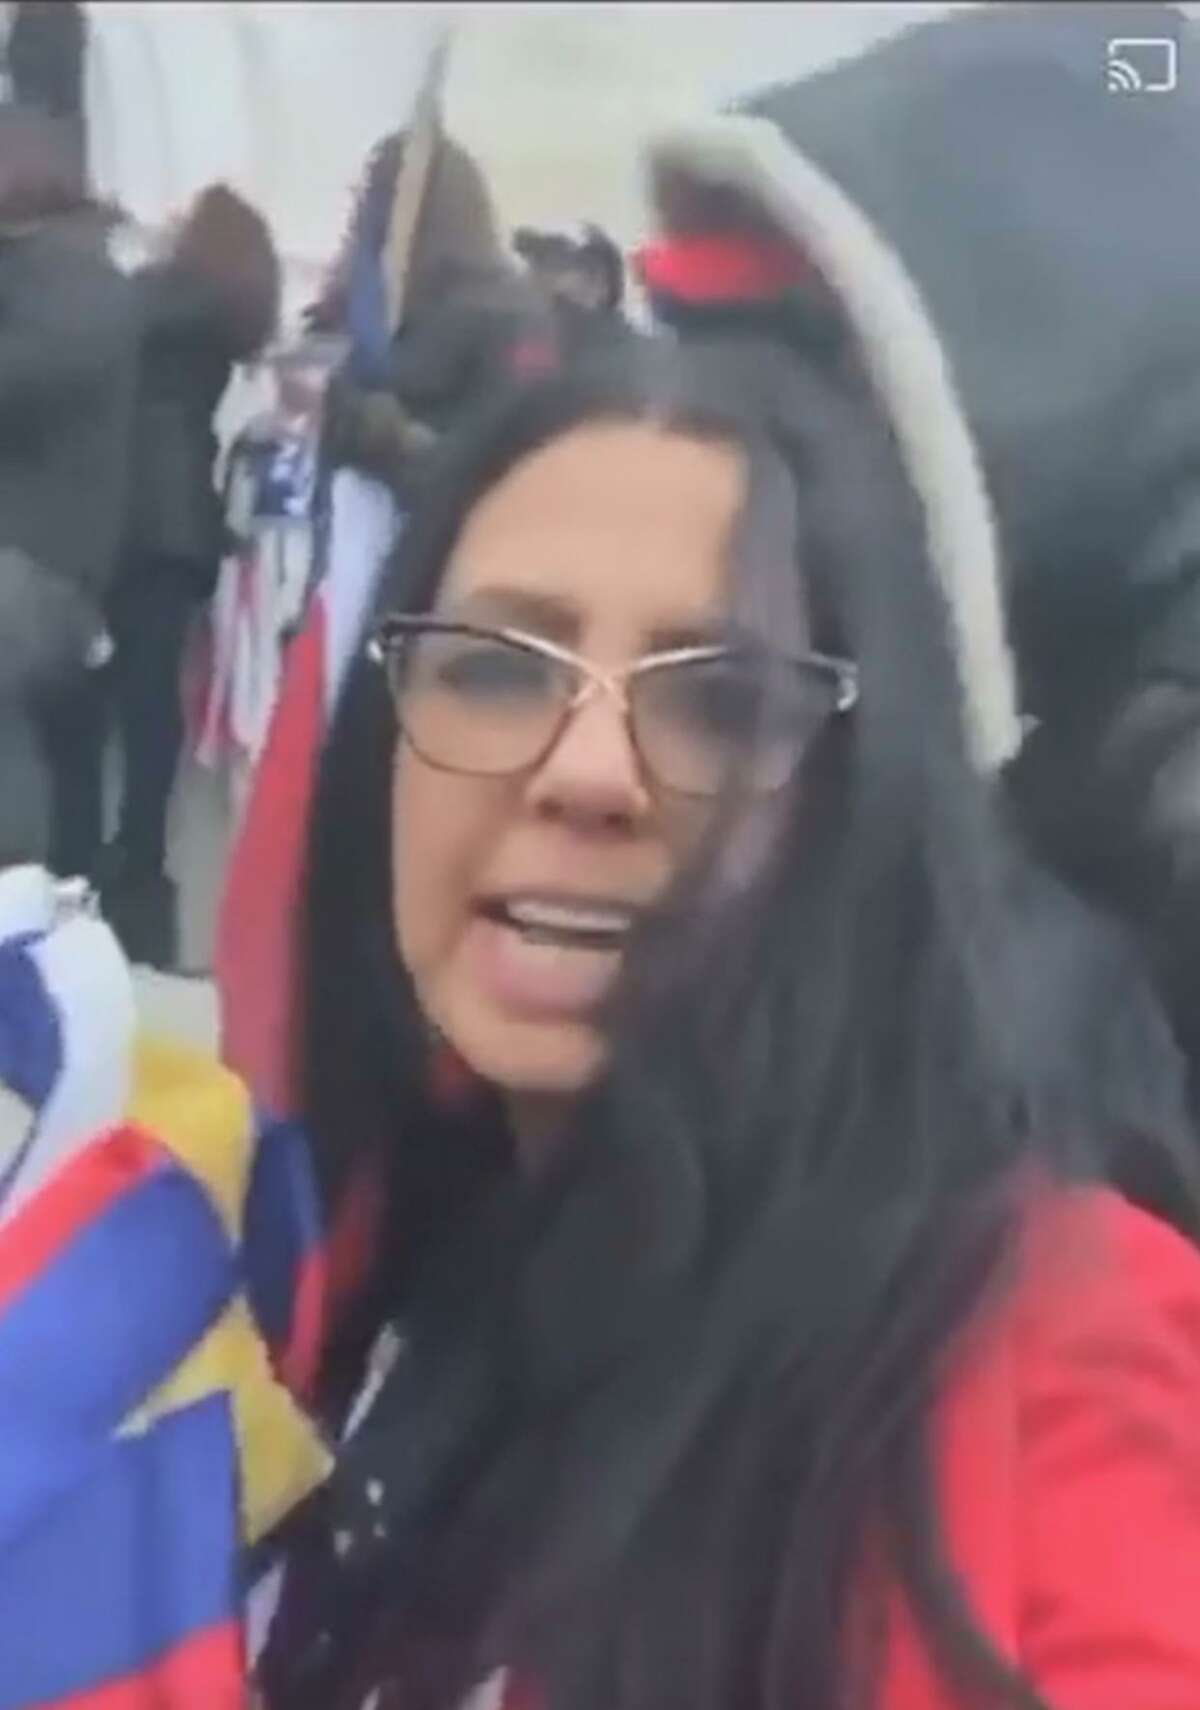 Mariposa Castro, formerly of Gilroy, was expected to be sentenced on Wednesday, Feb. 23, after pleading guilty for her role in the storming of the U.S. Capitol on Jan. 6, 2021. Prosecutors shared photos of Castro taken that day.